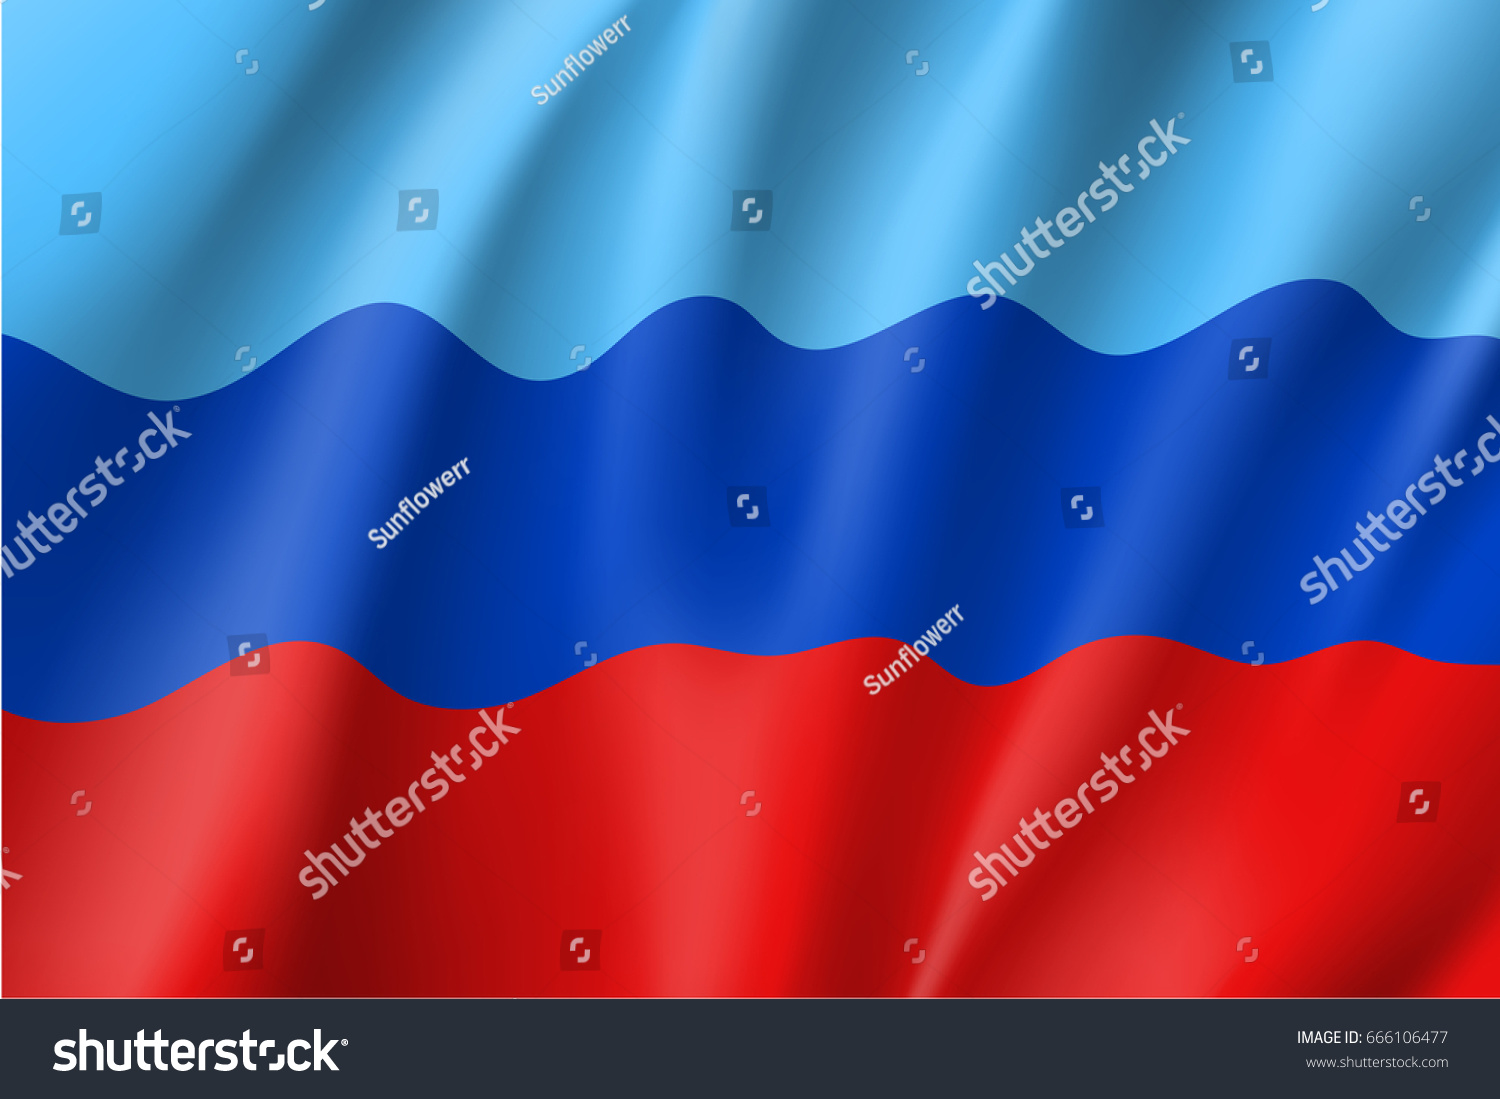 Luhansk People's Republic flag, landlocked self-proclaimed state in eastern Ukraine, blue, navy and red tricolor, state emblem. Vector realistic style illustration #666106477